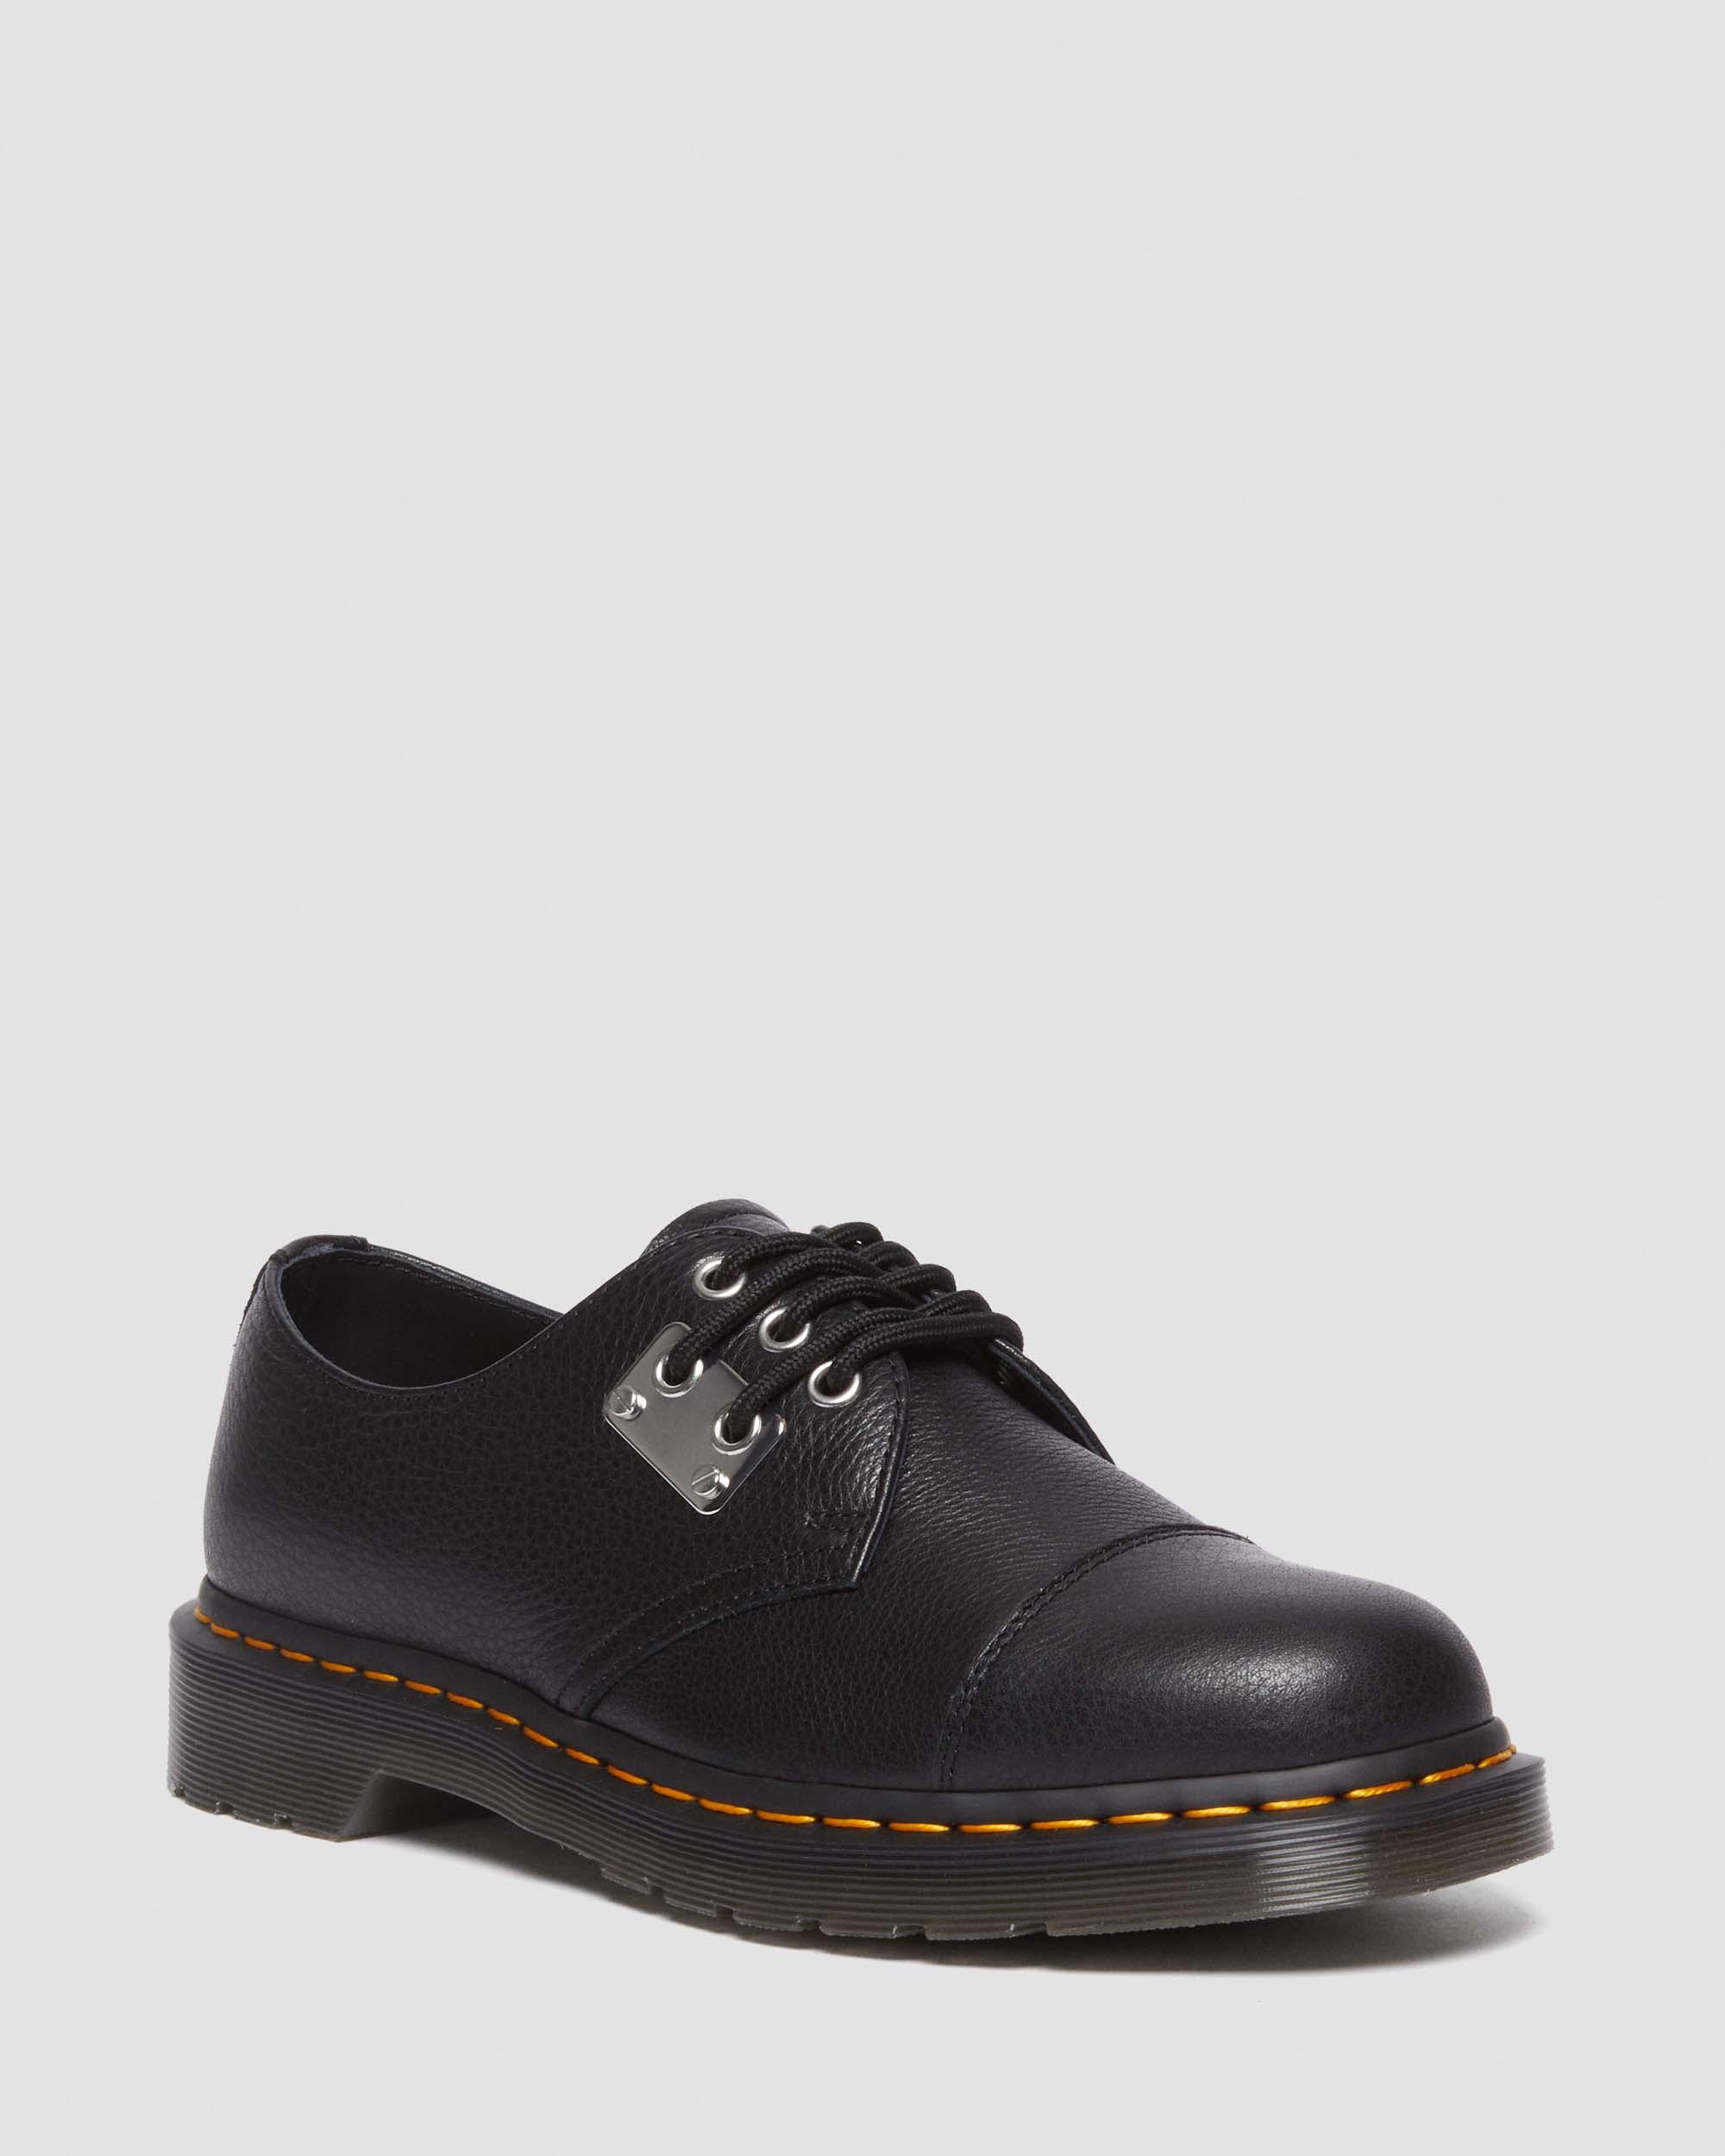 1461 Toe Plate Lunar Leather Oxford Shoes